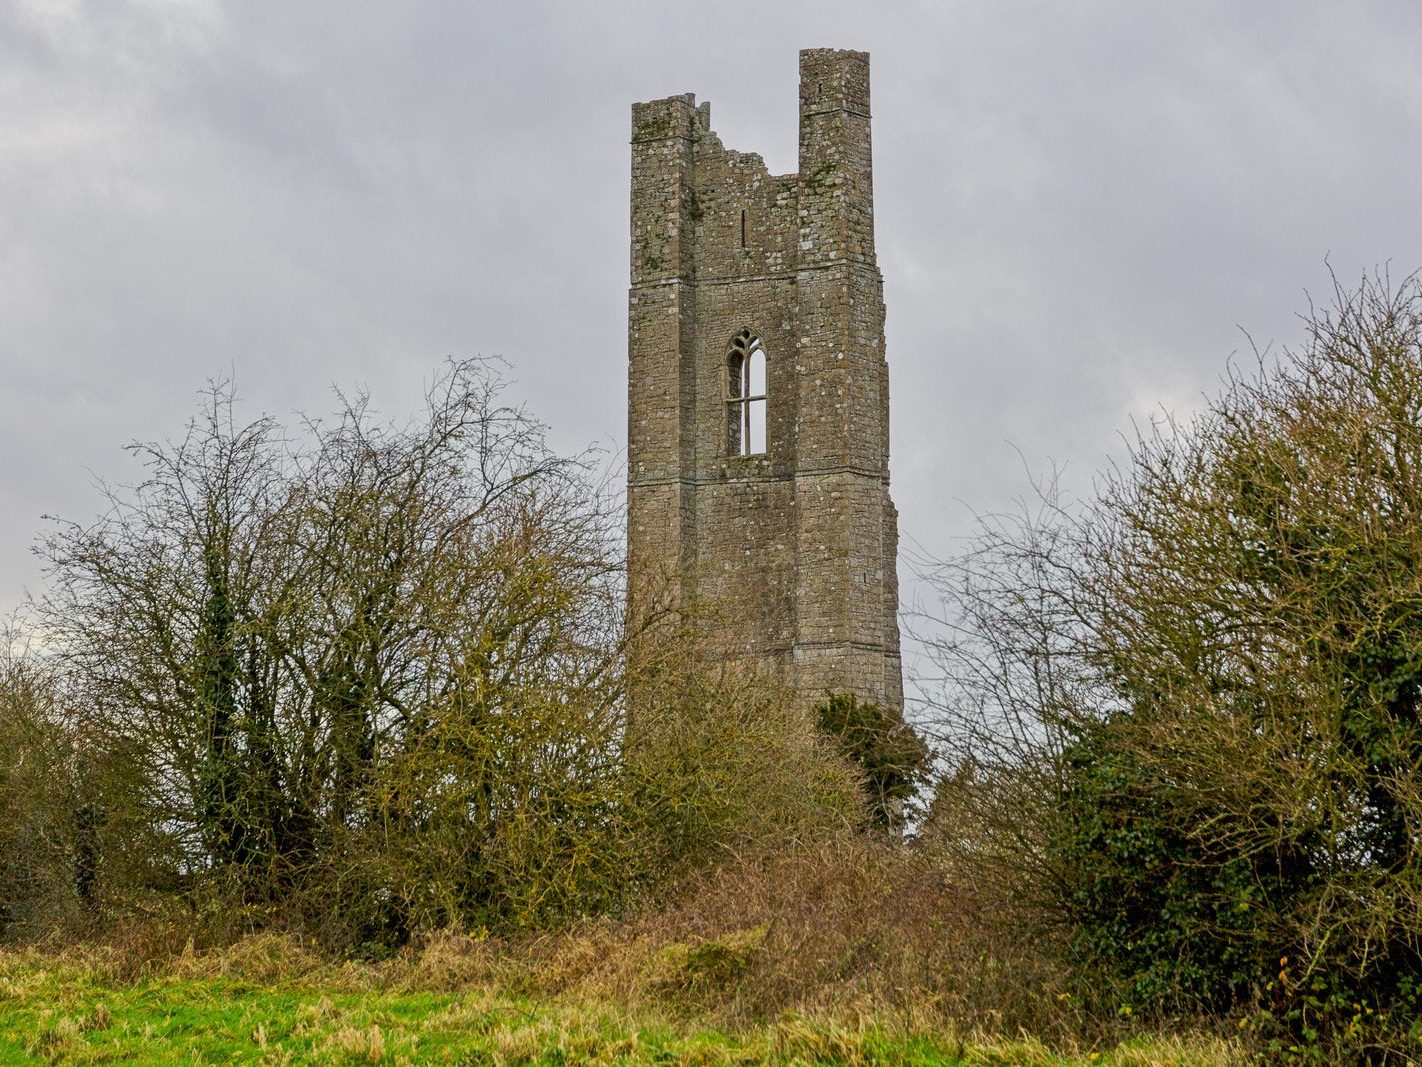 THE YELLOW STEEPLE DOMINATES THE TOWN OF TRIM [ALSO KNOWN AS ST MARYS ABBEY]-226749-1